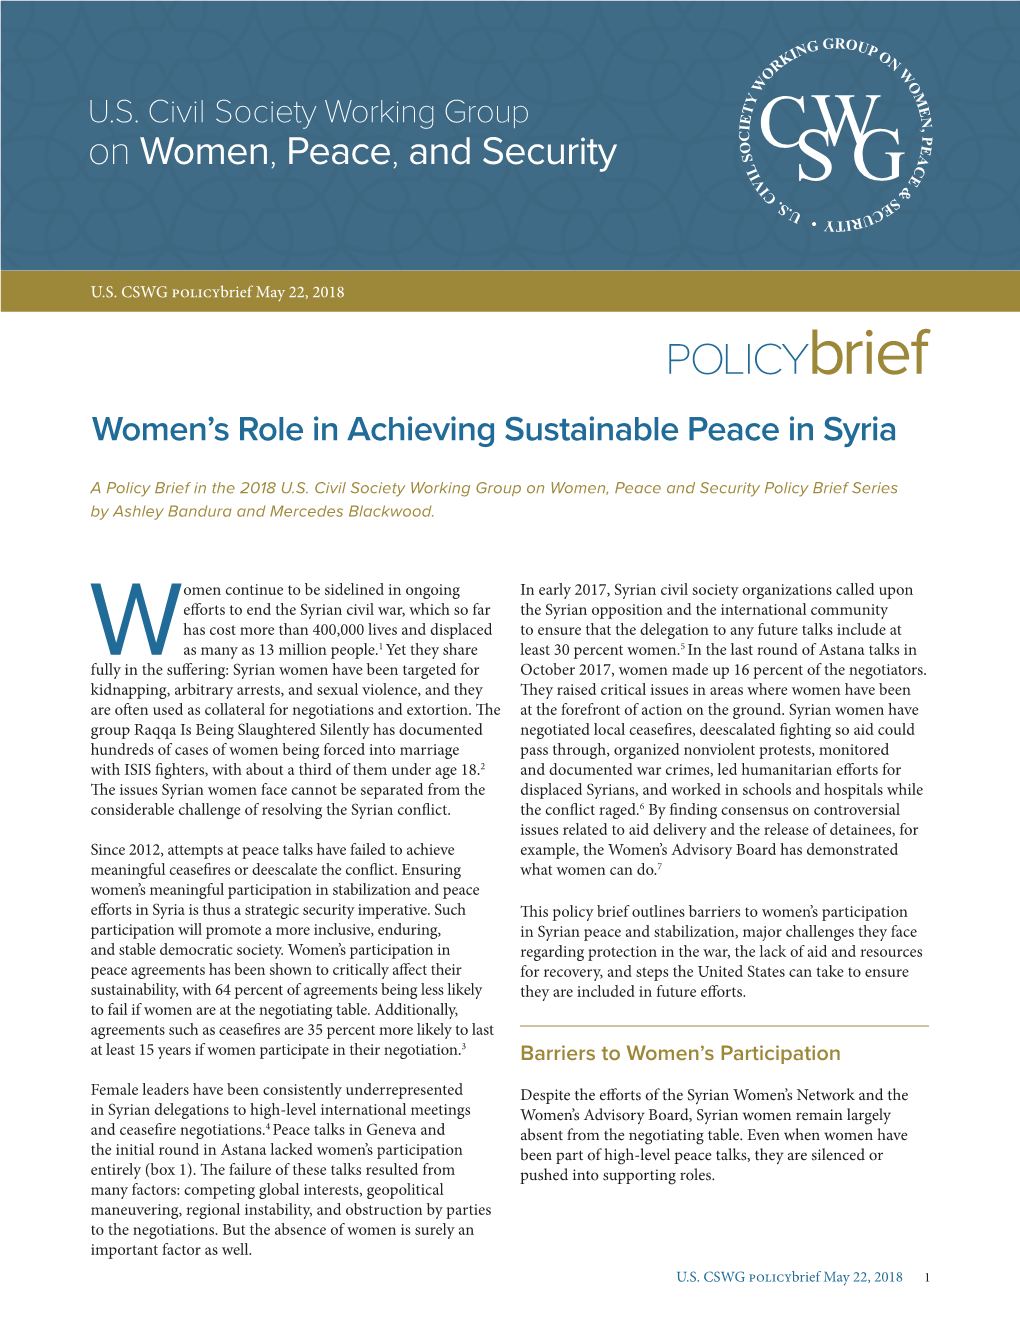 Women's Role in Achieving Sustainable Peace in Syria